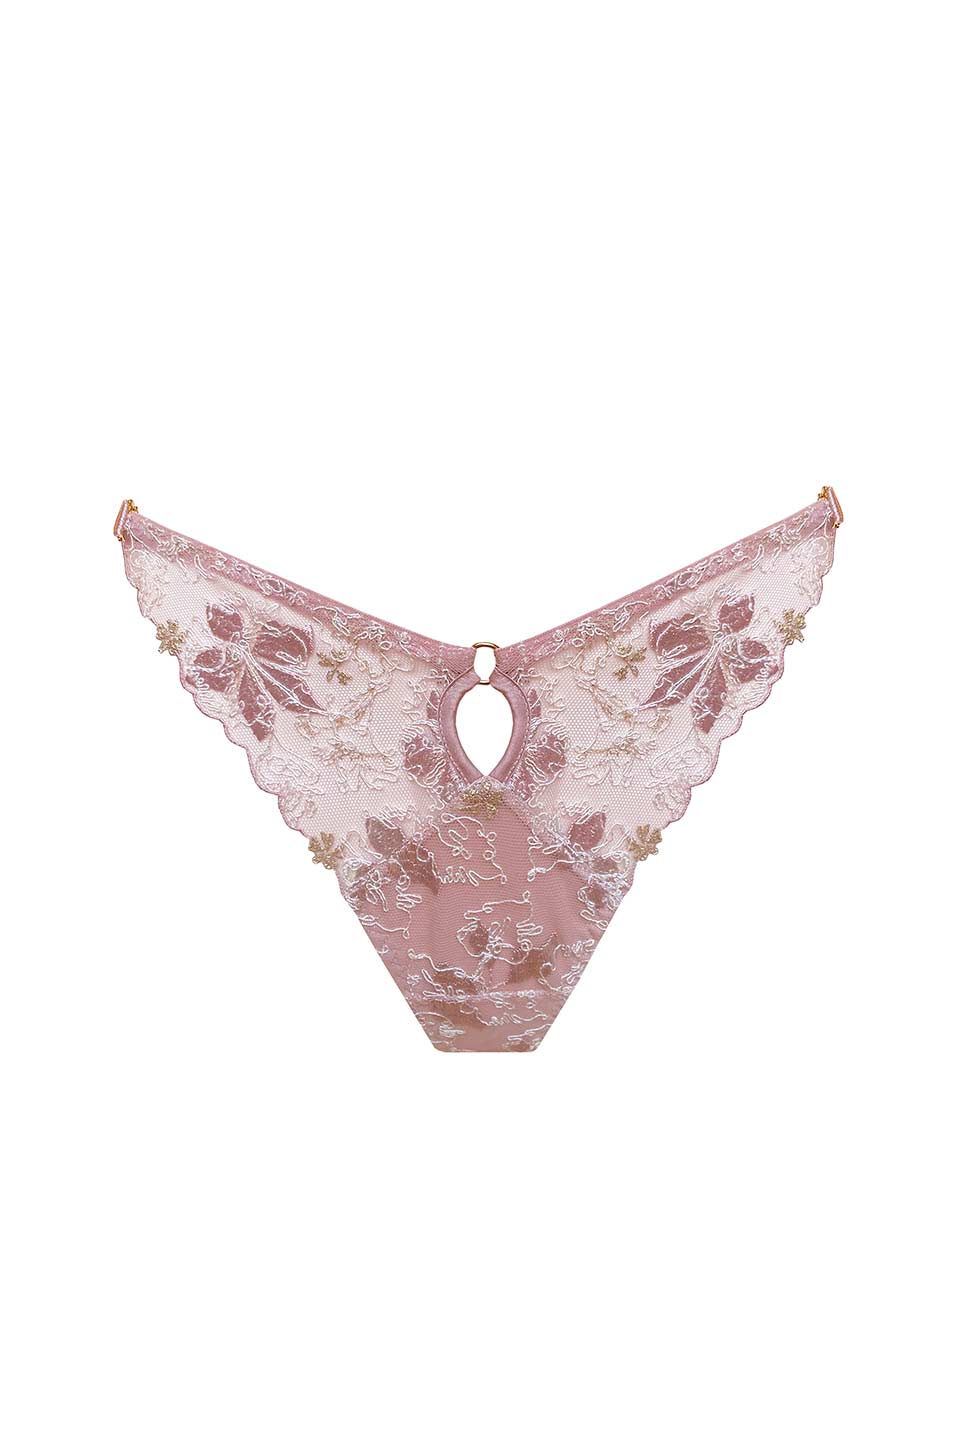 Atelier bordelle vita thong rose front. Product gallery 1